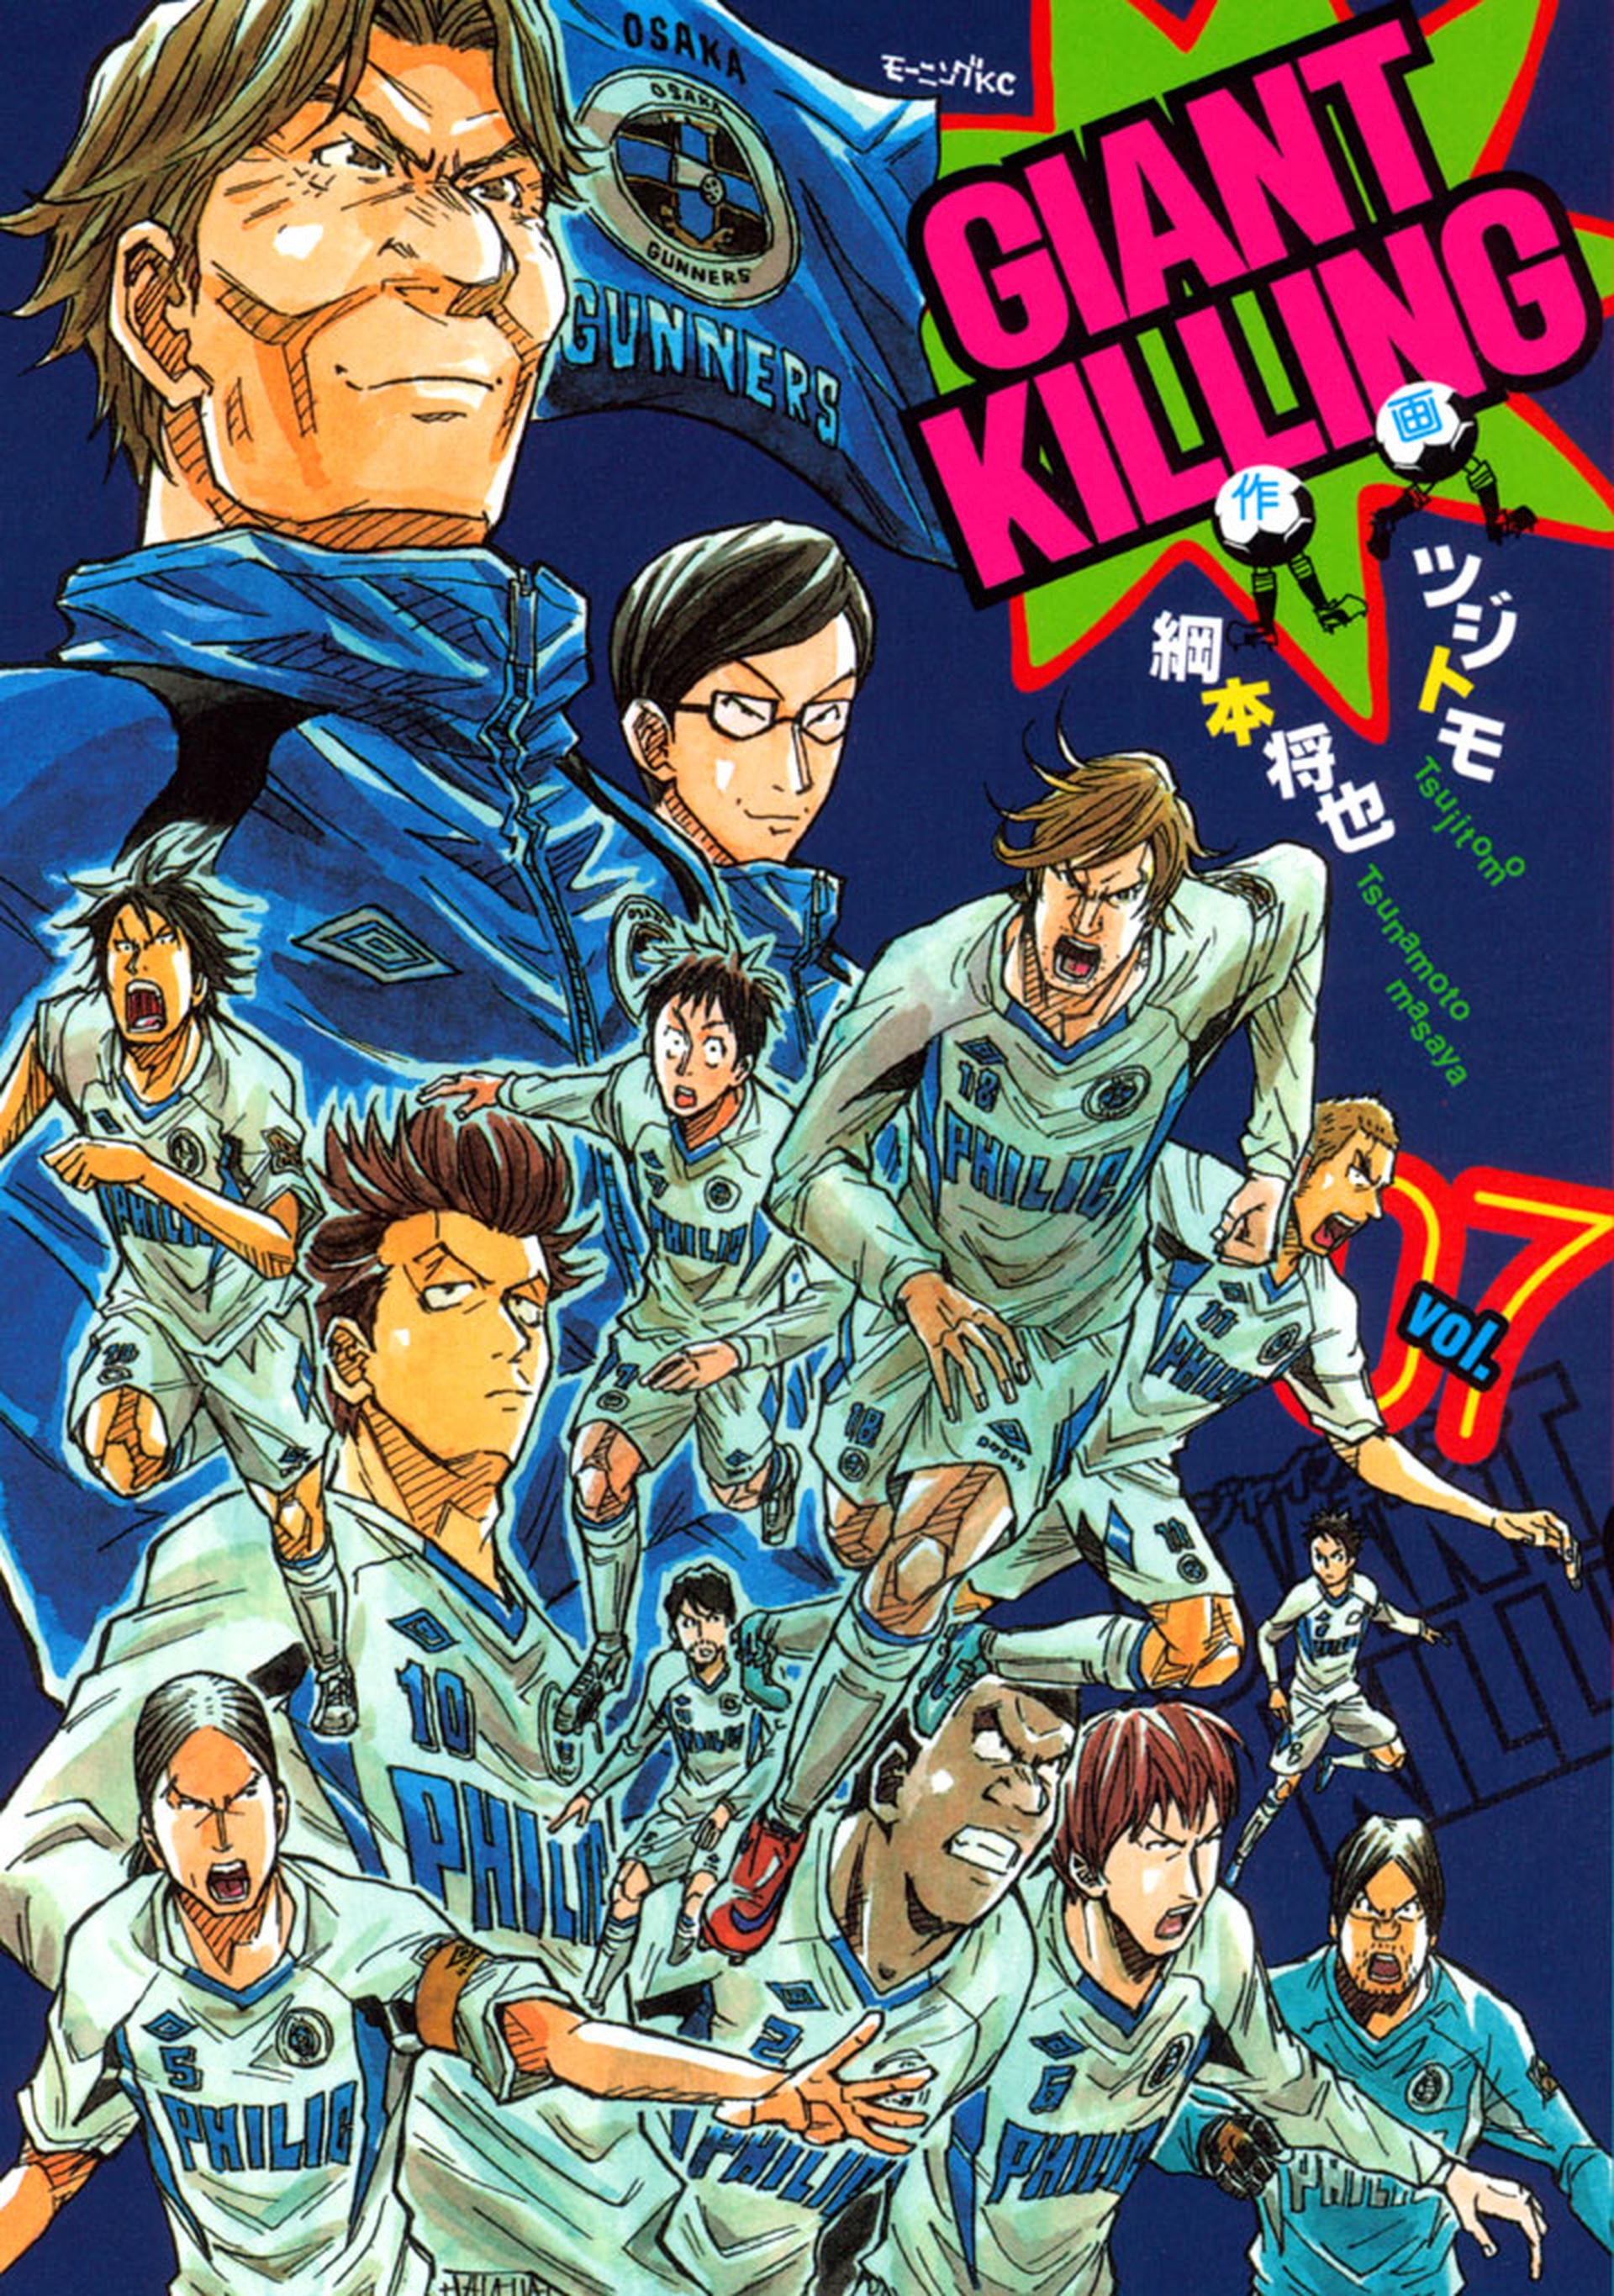 Giant killing capitulo 17, By Giant killing